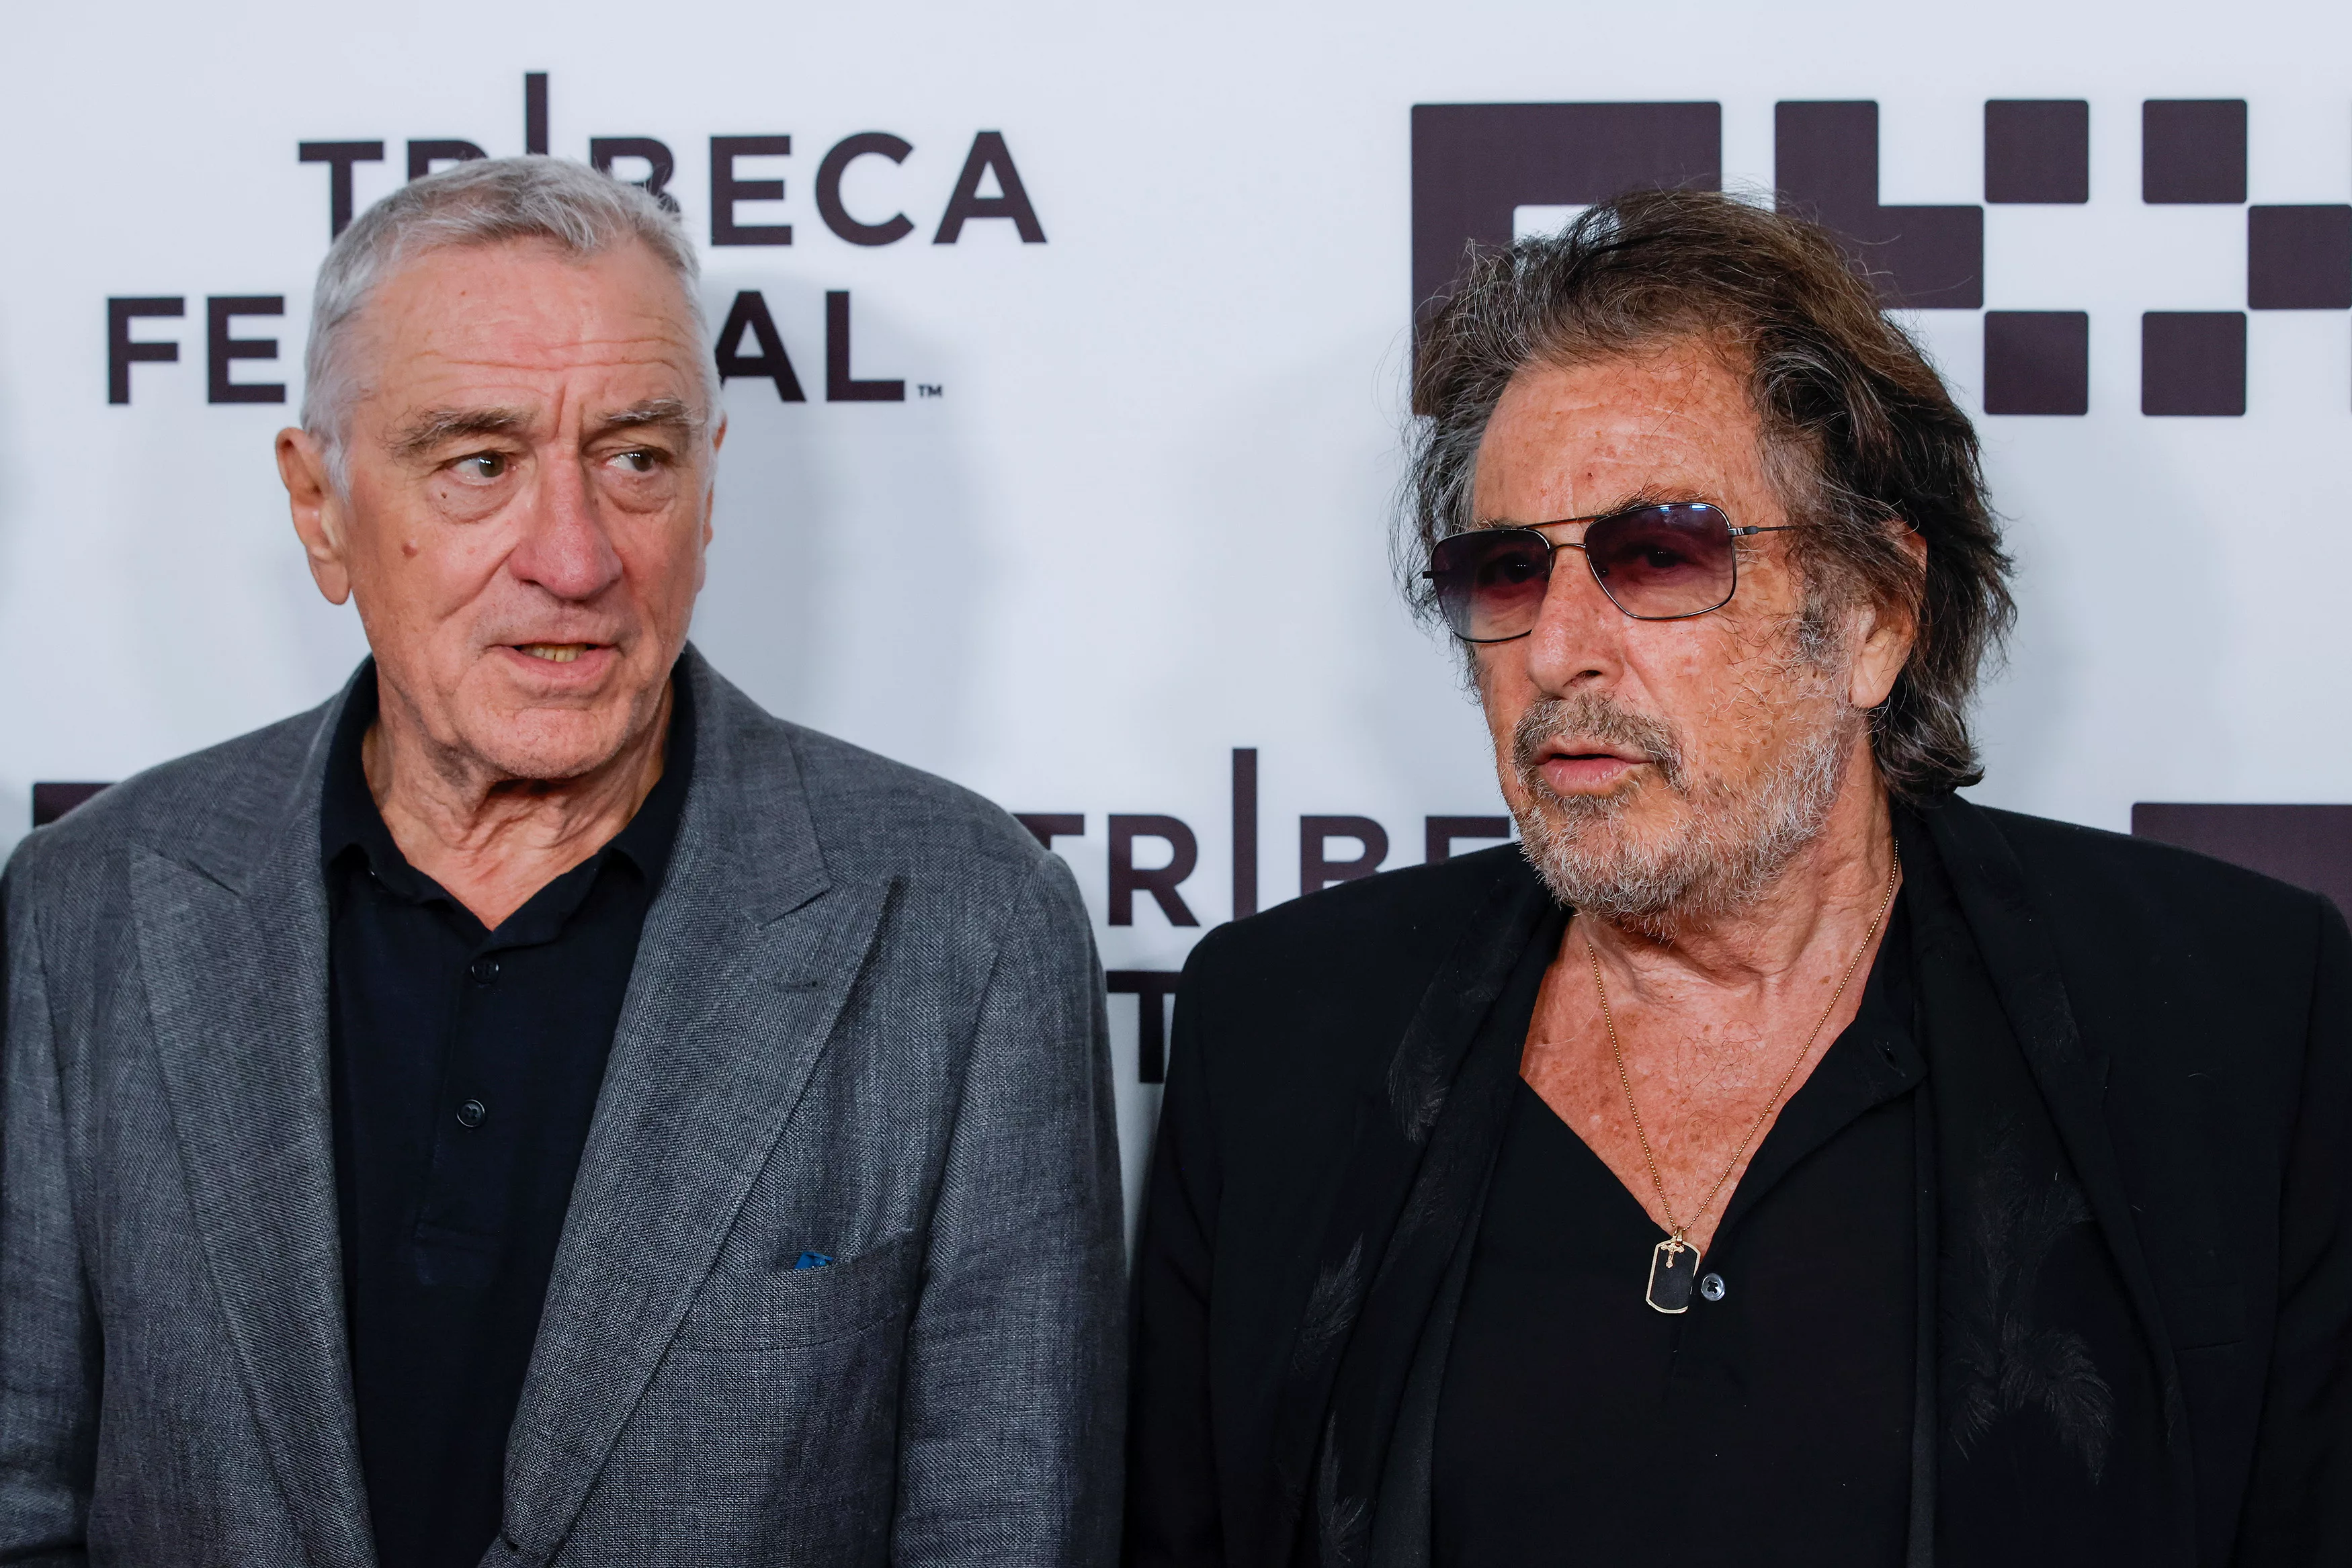 actors-robert-de-niro-and-al-pacino-attend-the-screening-of-a-4k-version-of-the-film-heat-during-2022-tribeca-festival-in-new-york